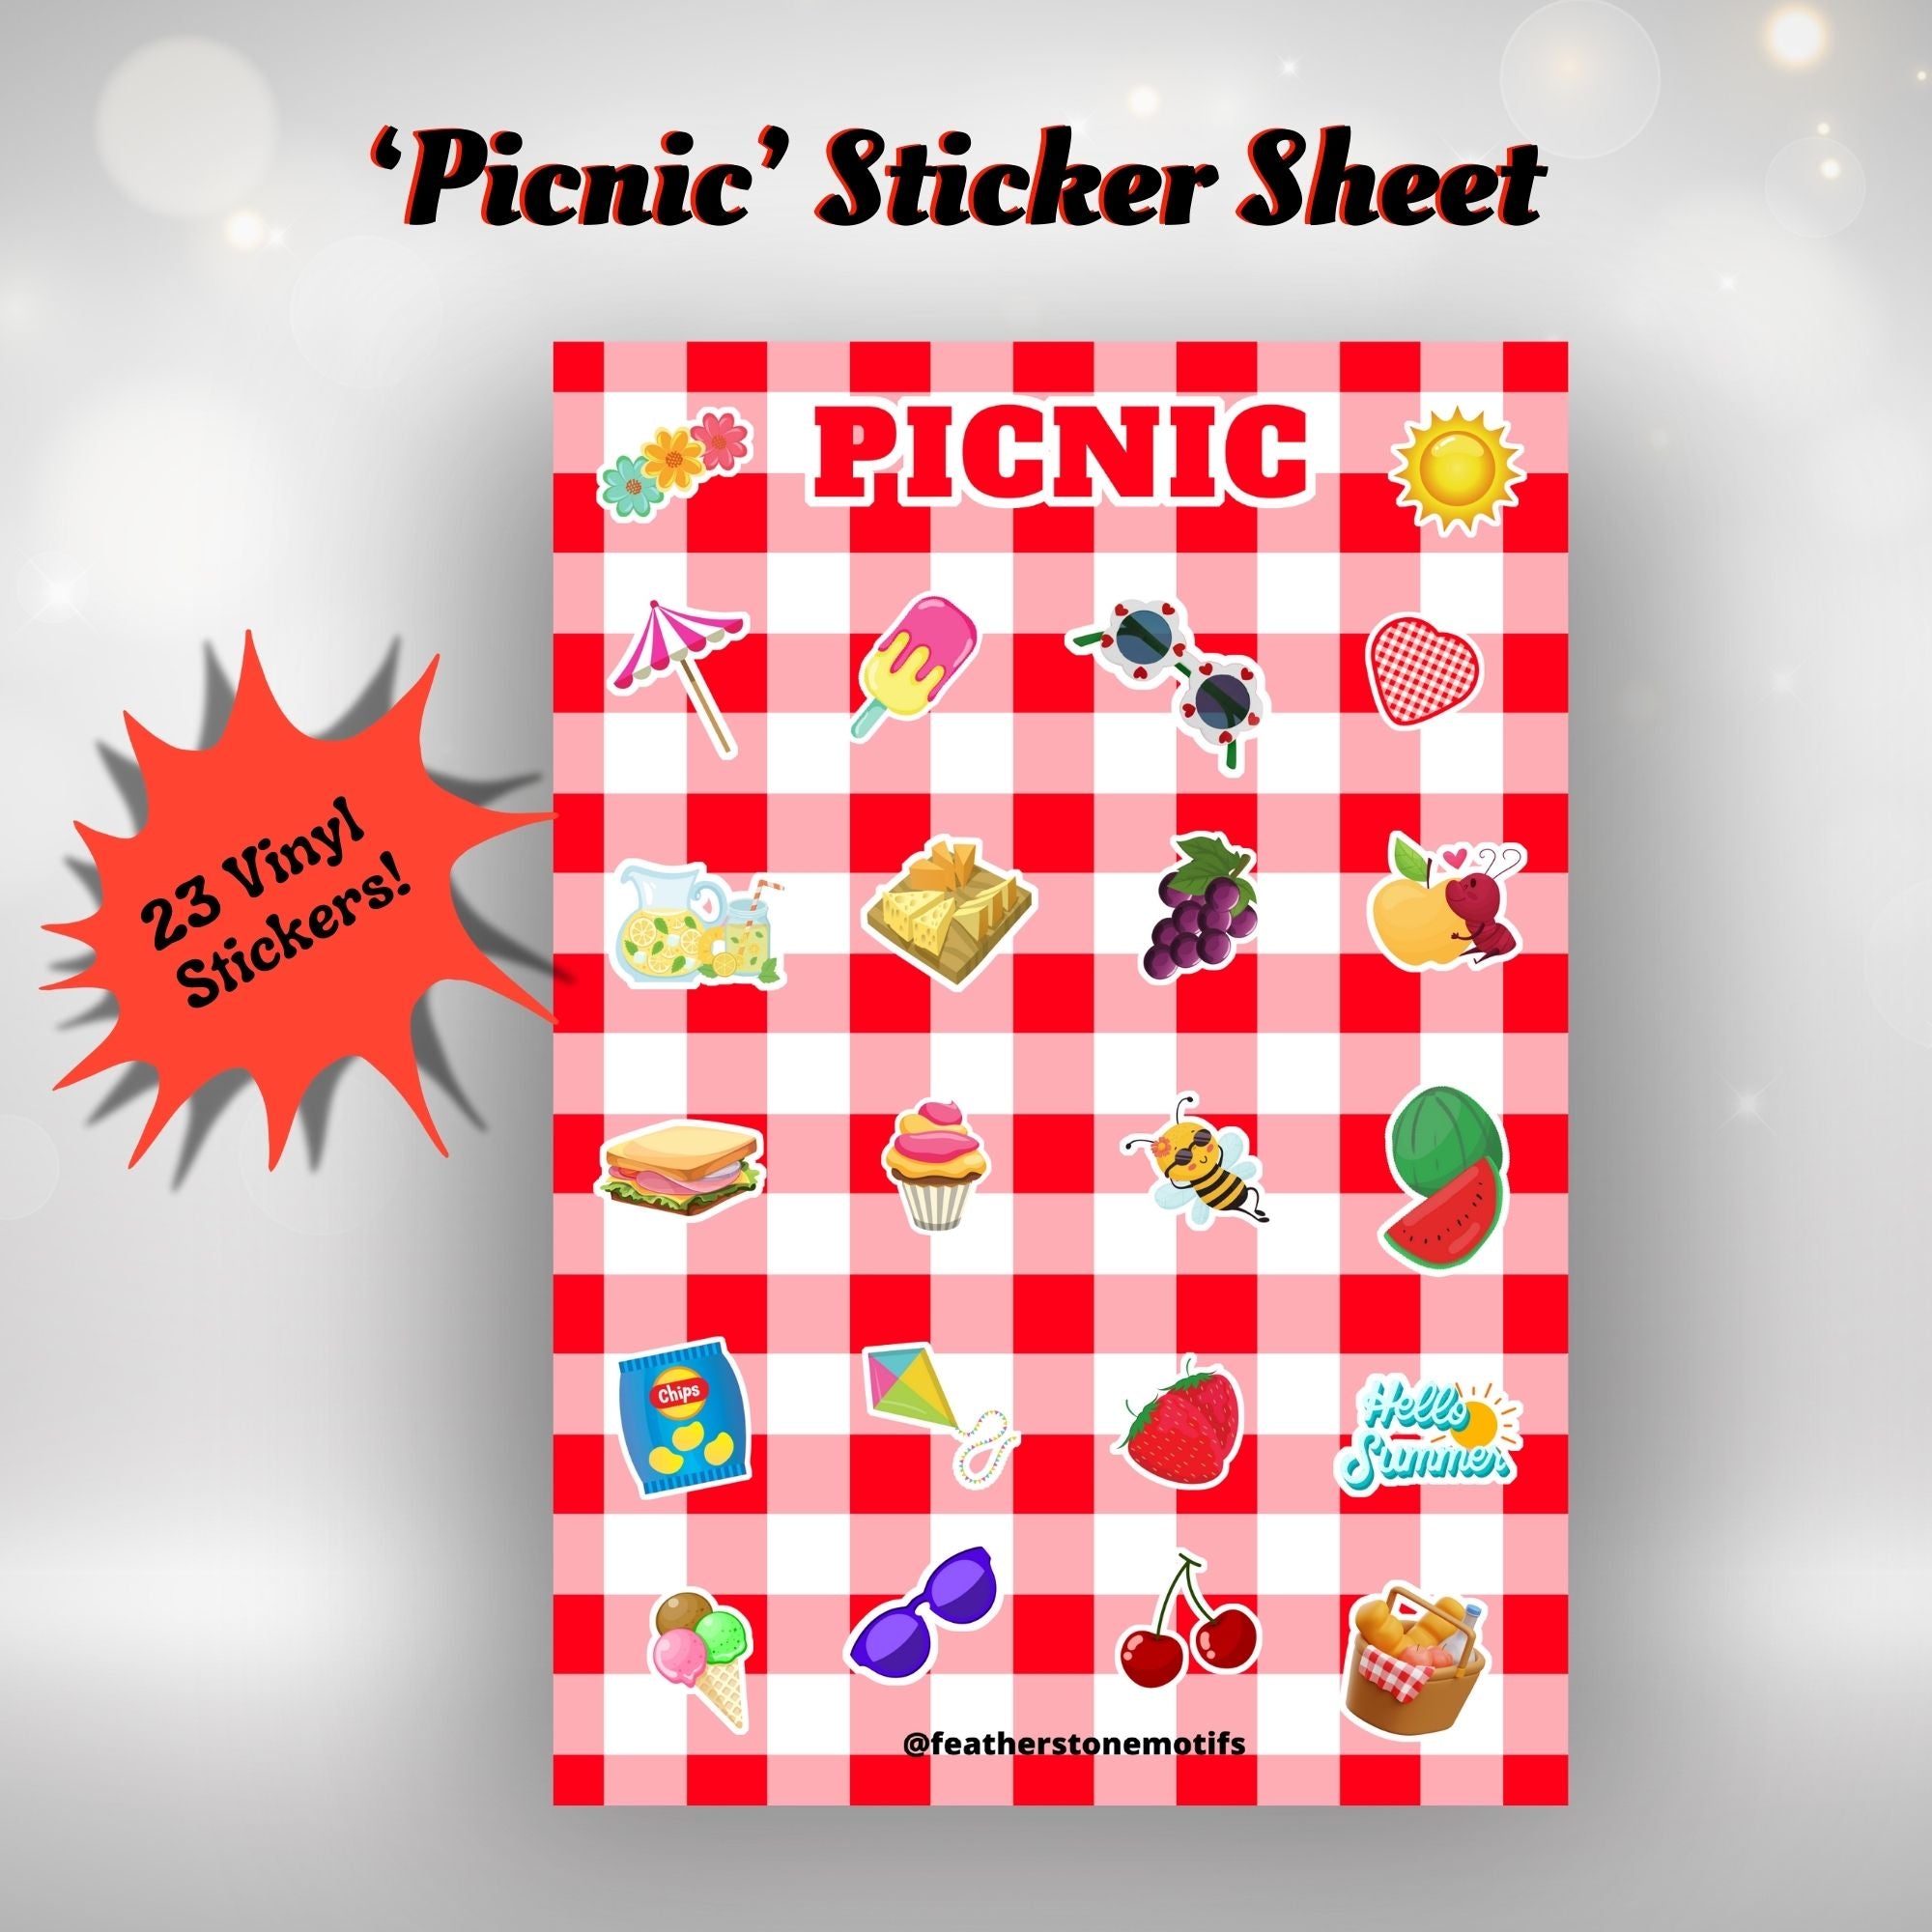 This image shows the Picnic Sticker Sheet with 23 vinyl stickers included in the Picnic themed Camp Postcard Kit.